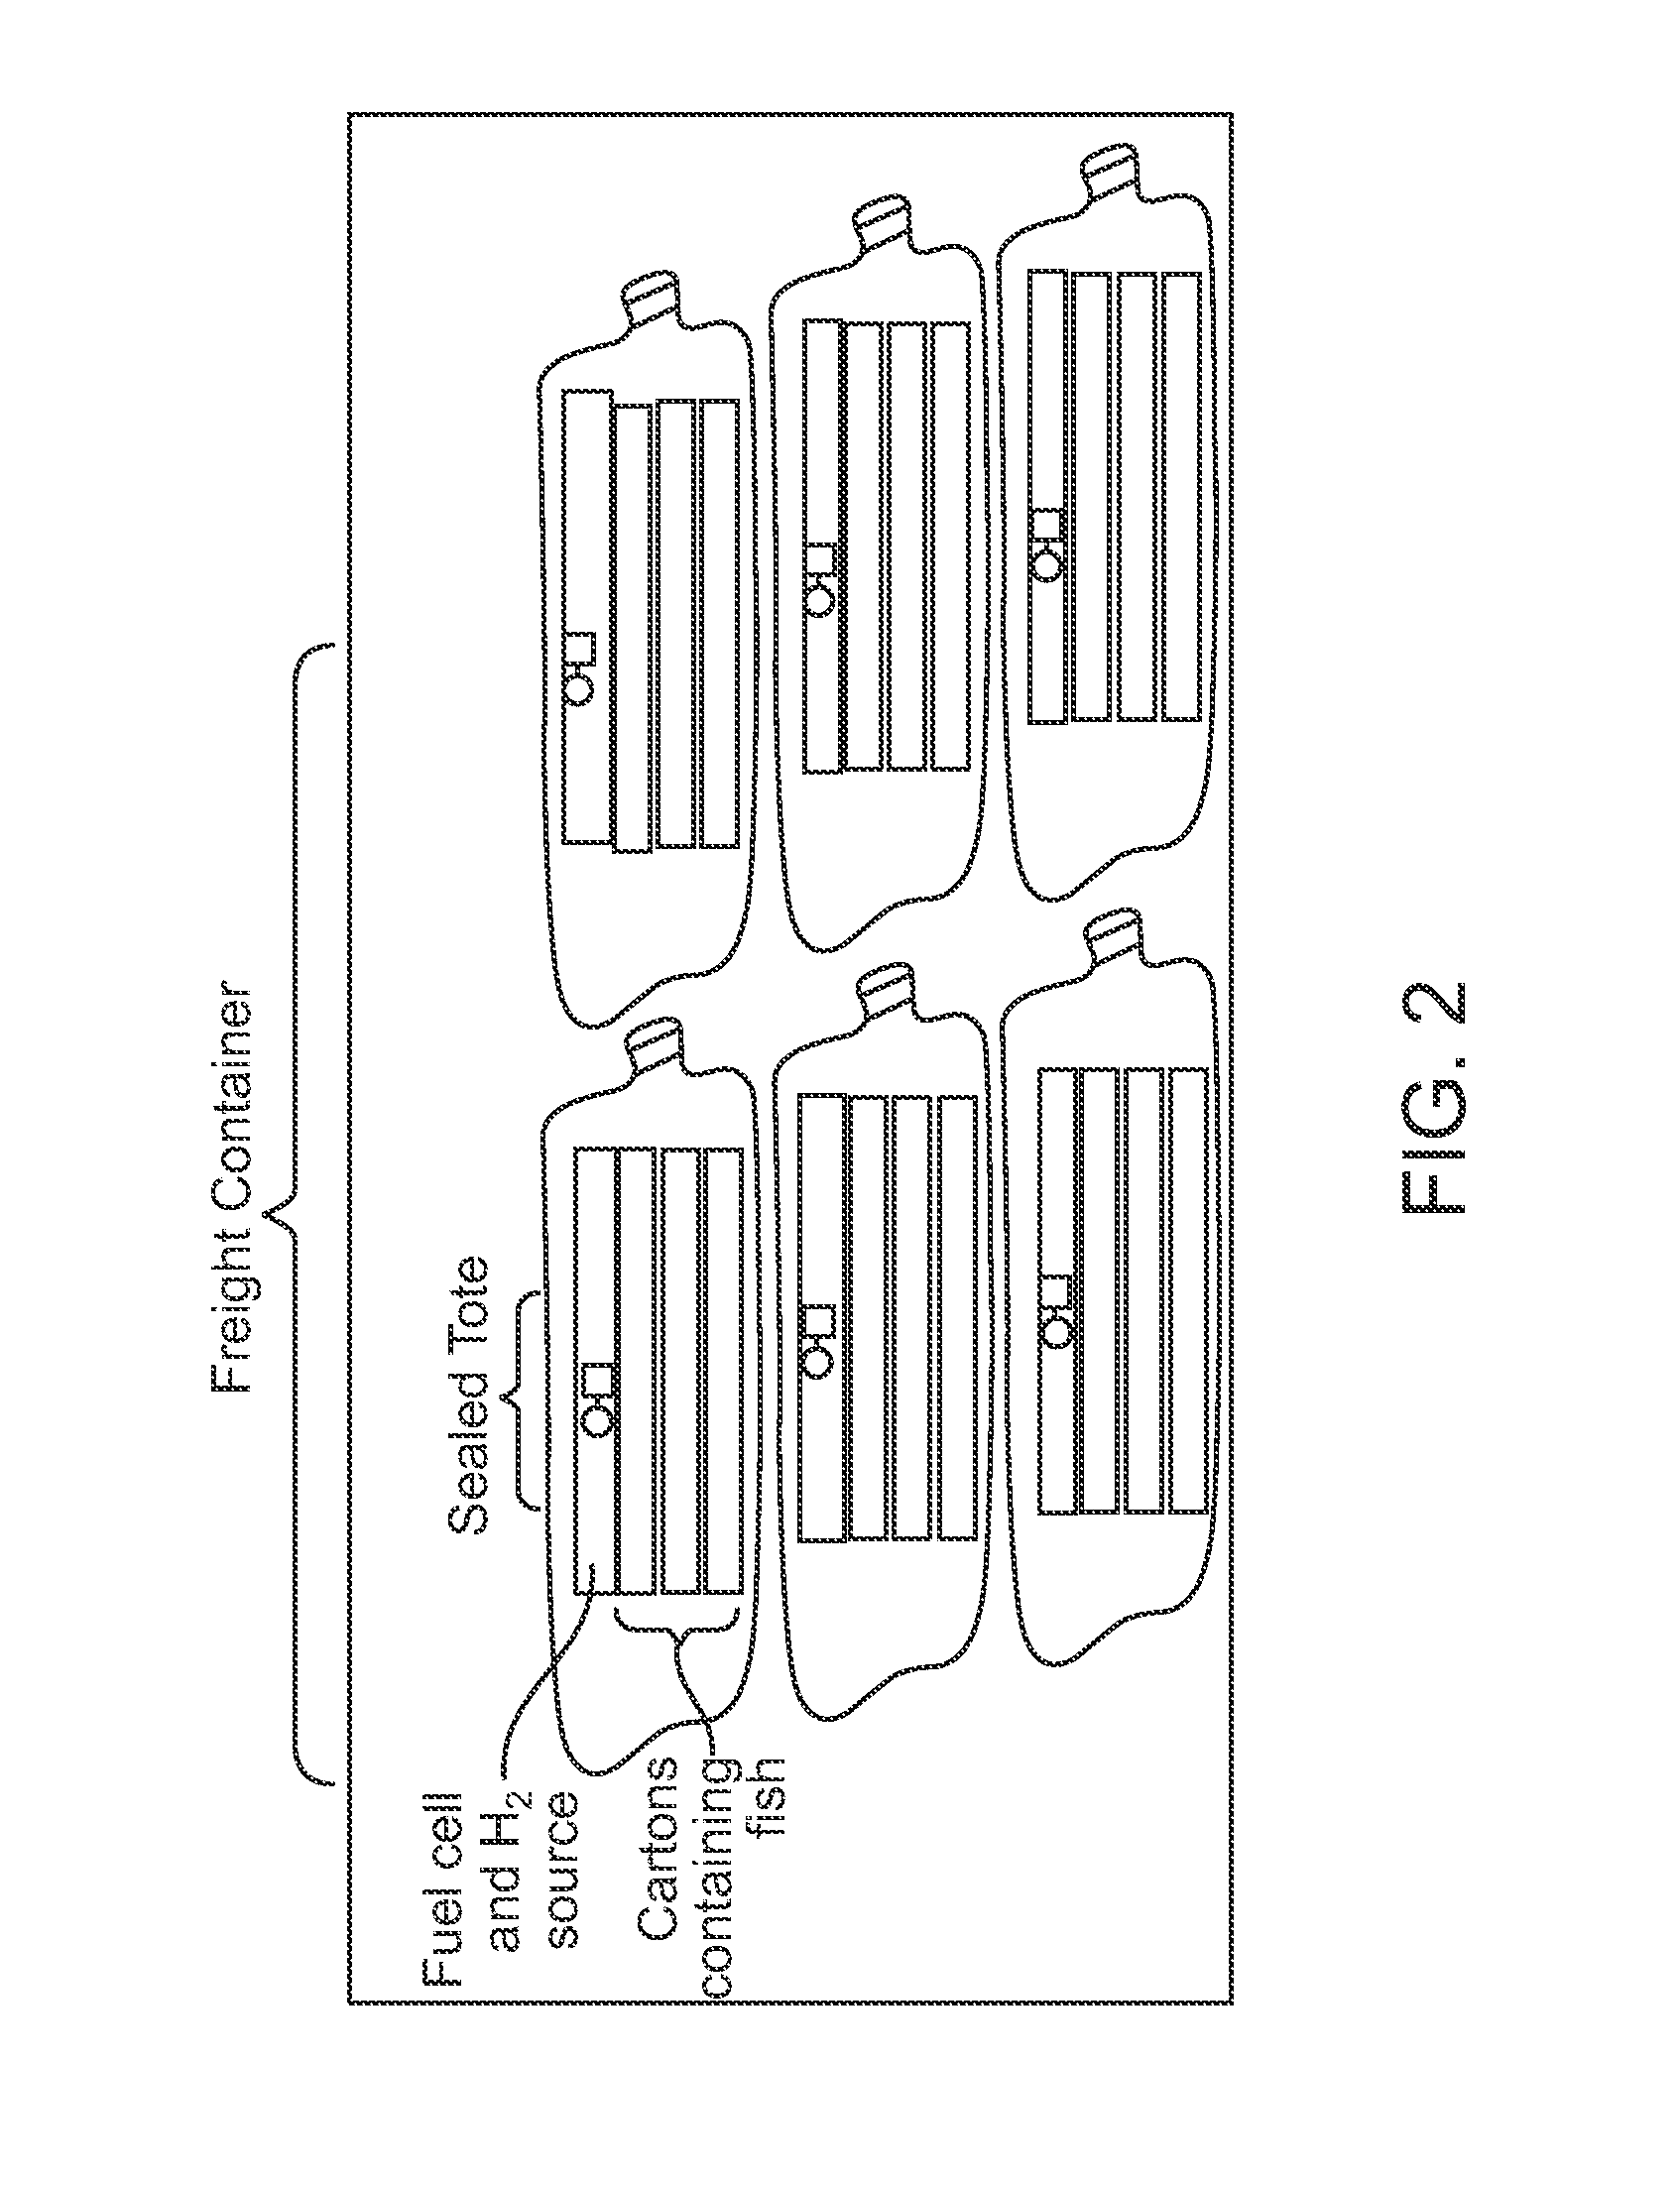 Systems and methods for maintaining perishable foods